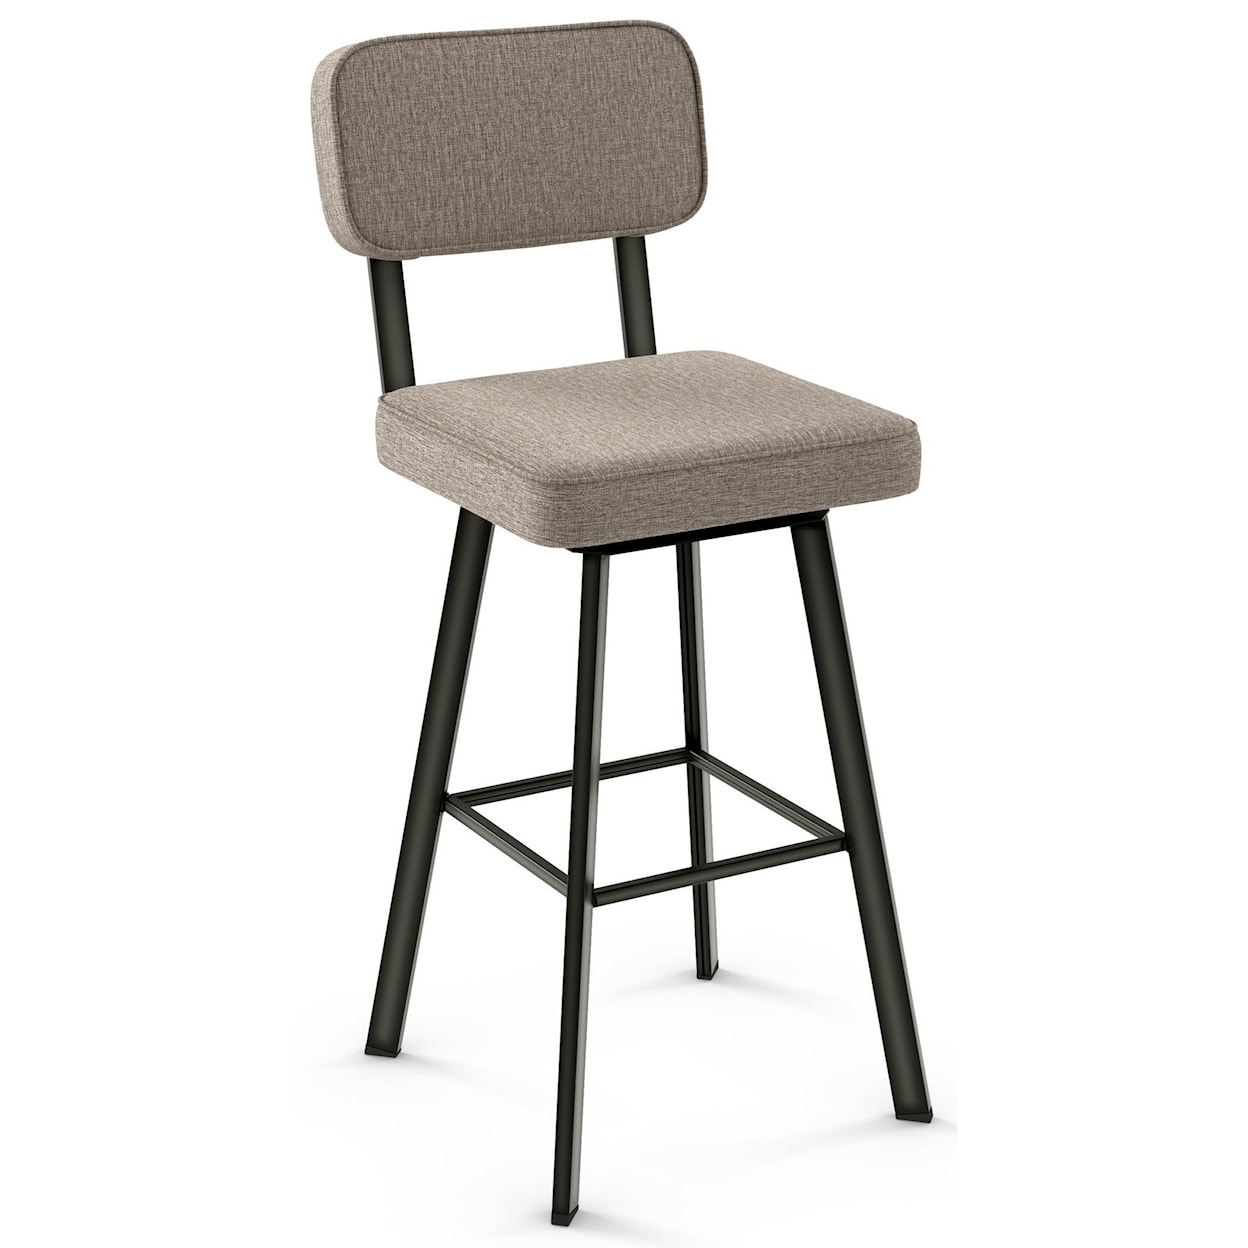 Amisco Industrial Brixton Swivel Stool, Counter Height